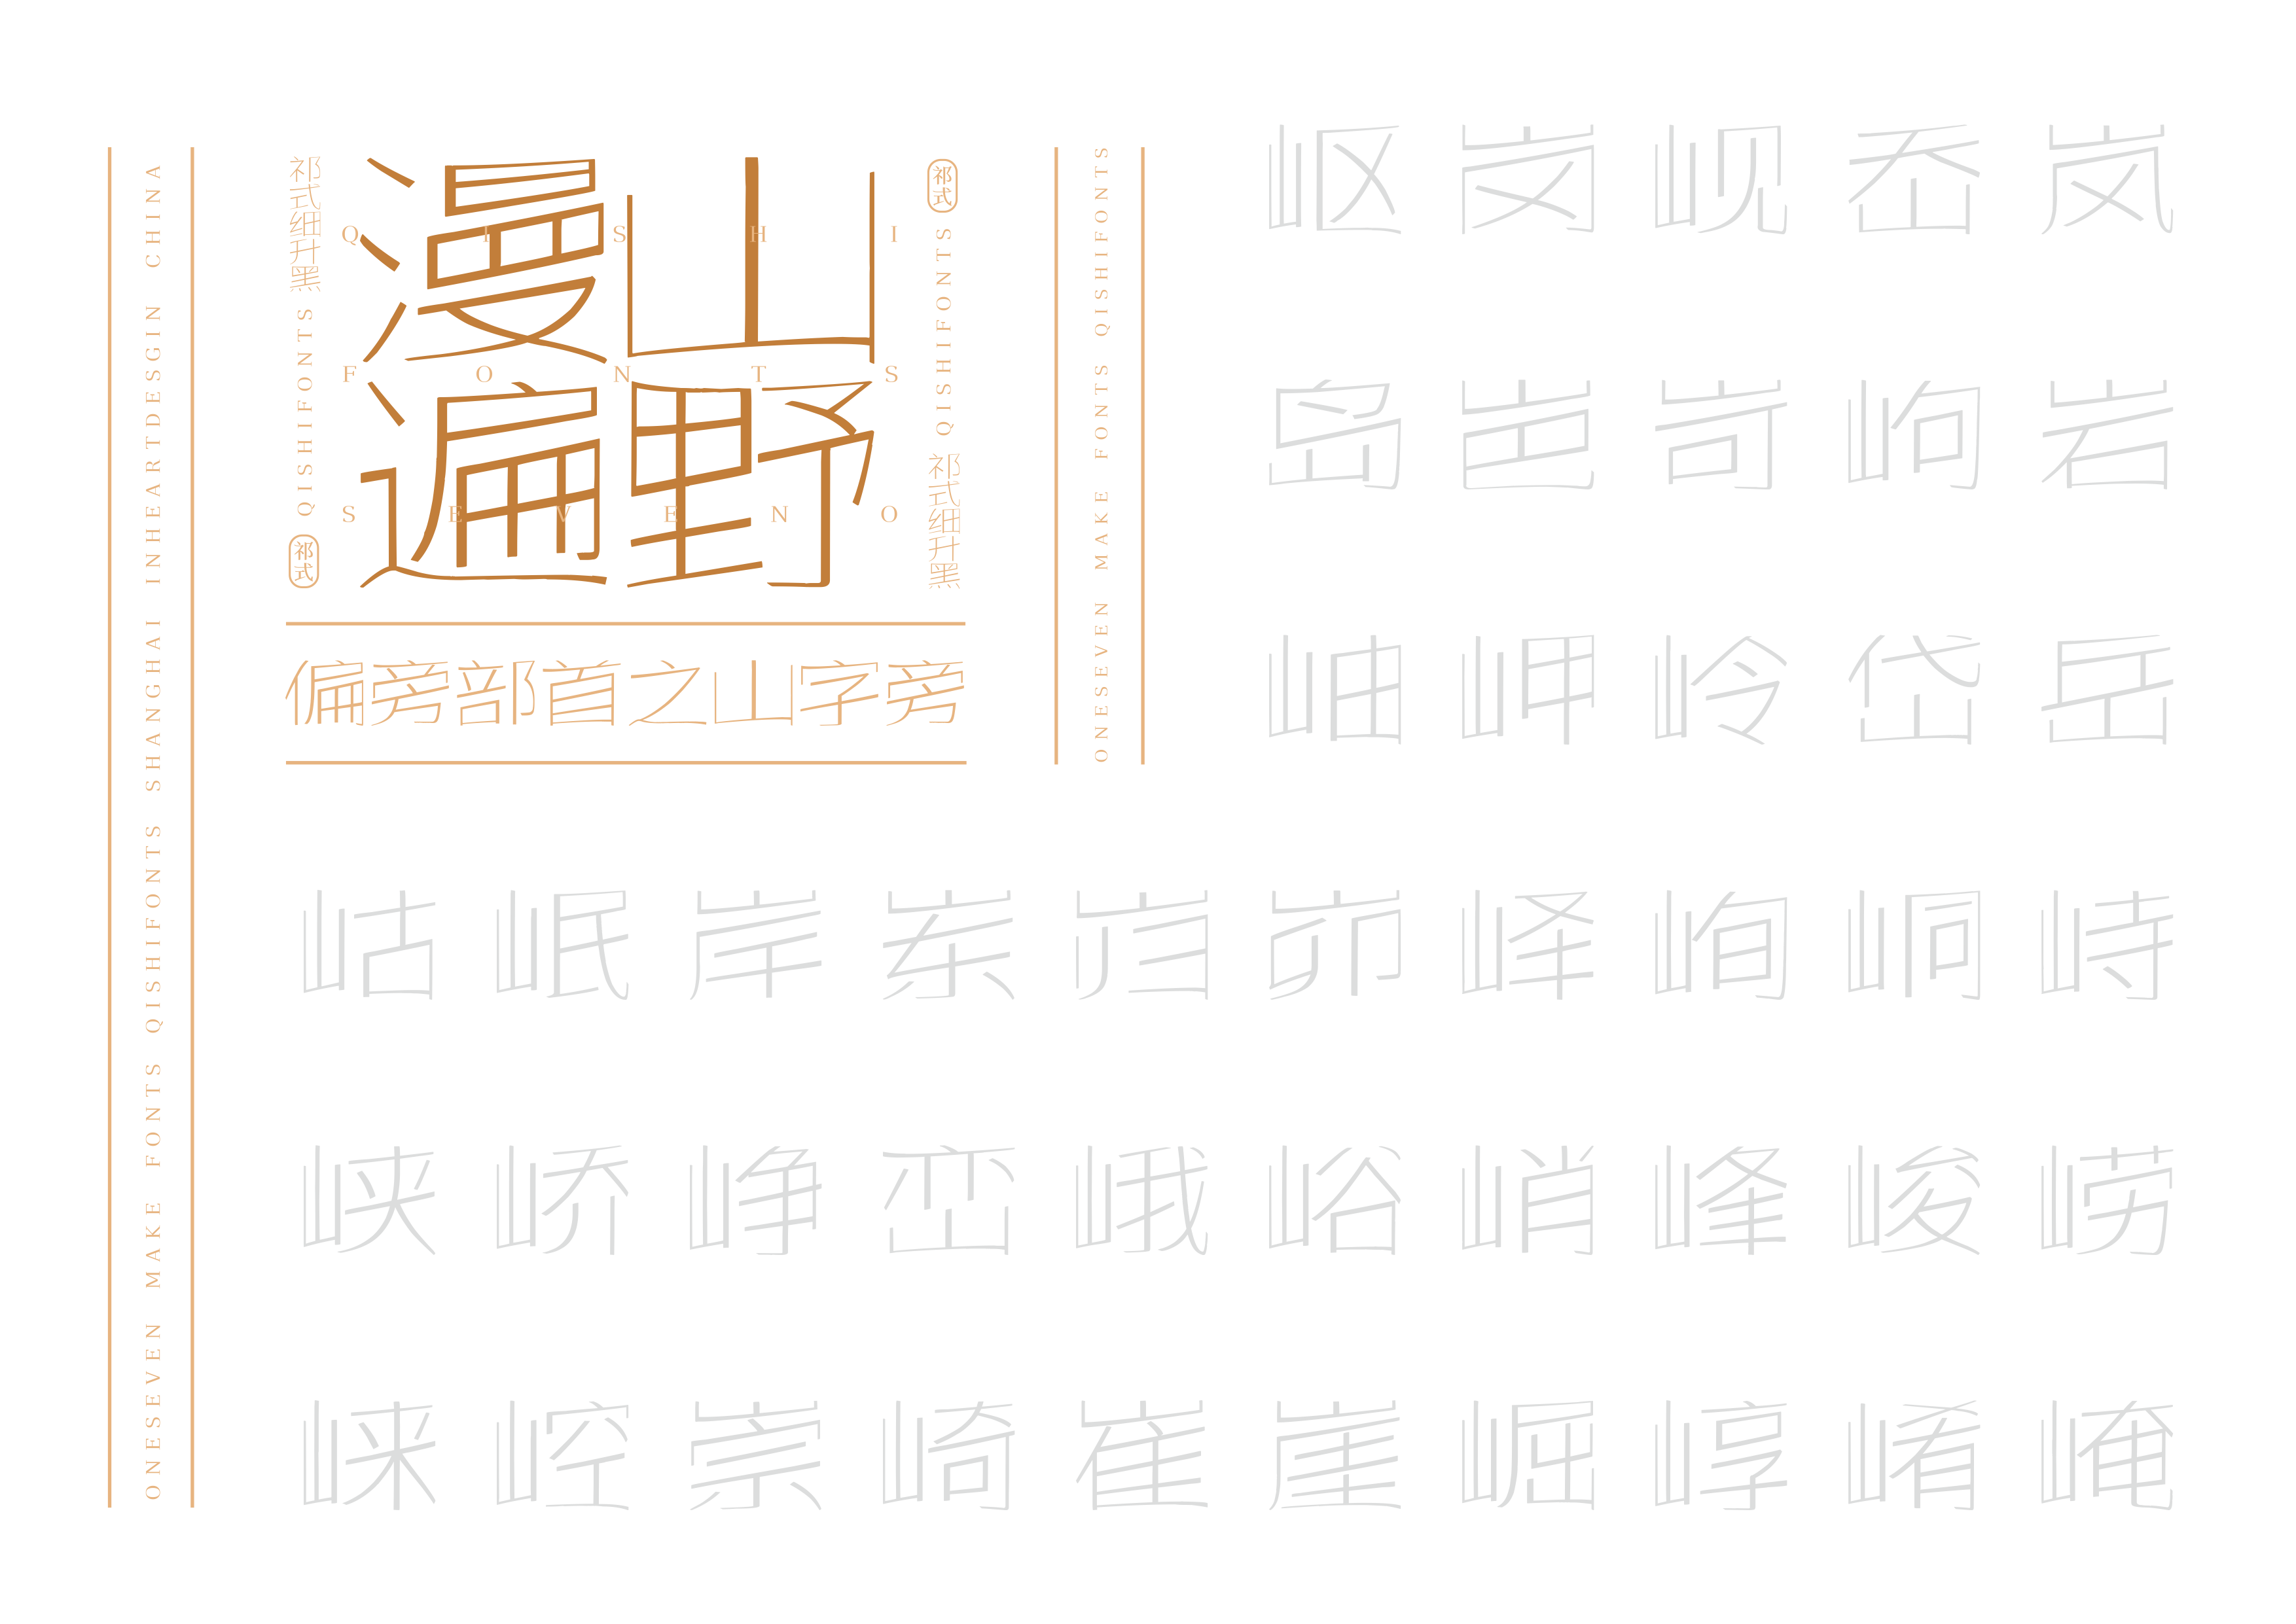 49P Collection of the latest Chinese font design schemes in 2021 #.119